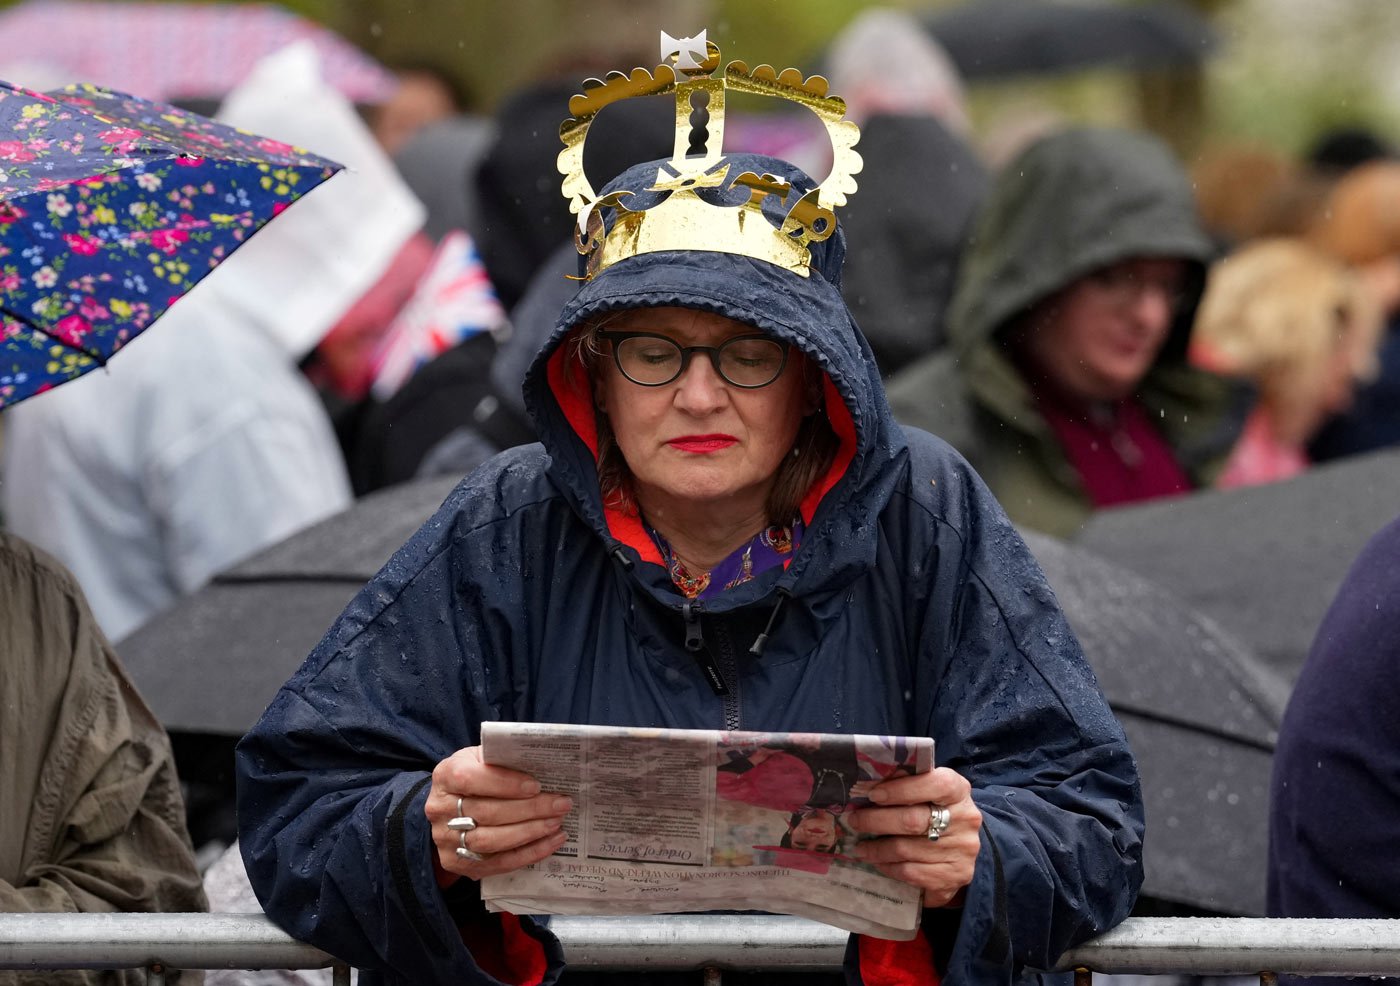 A royal fan waits for the procession to begin on The Mall in London